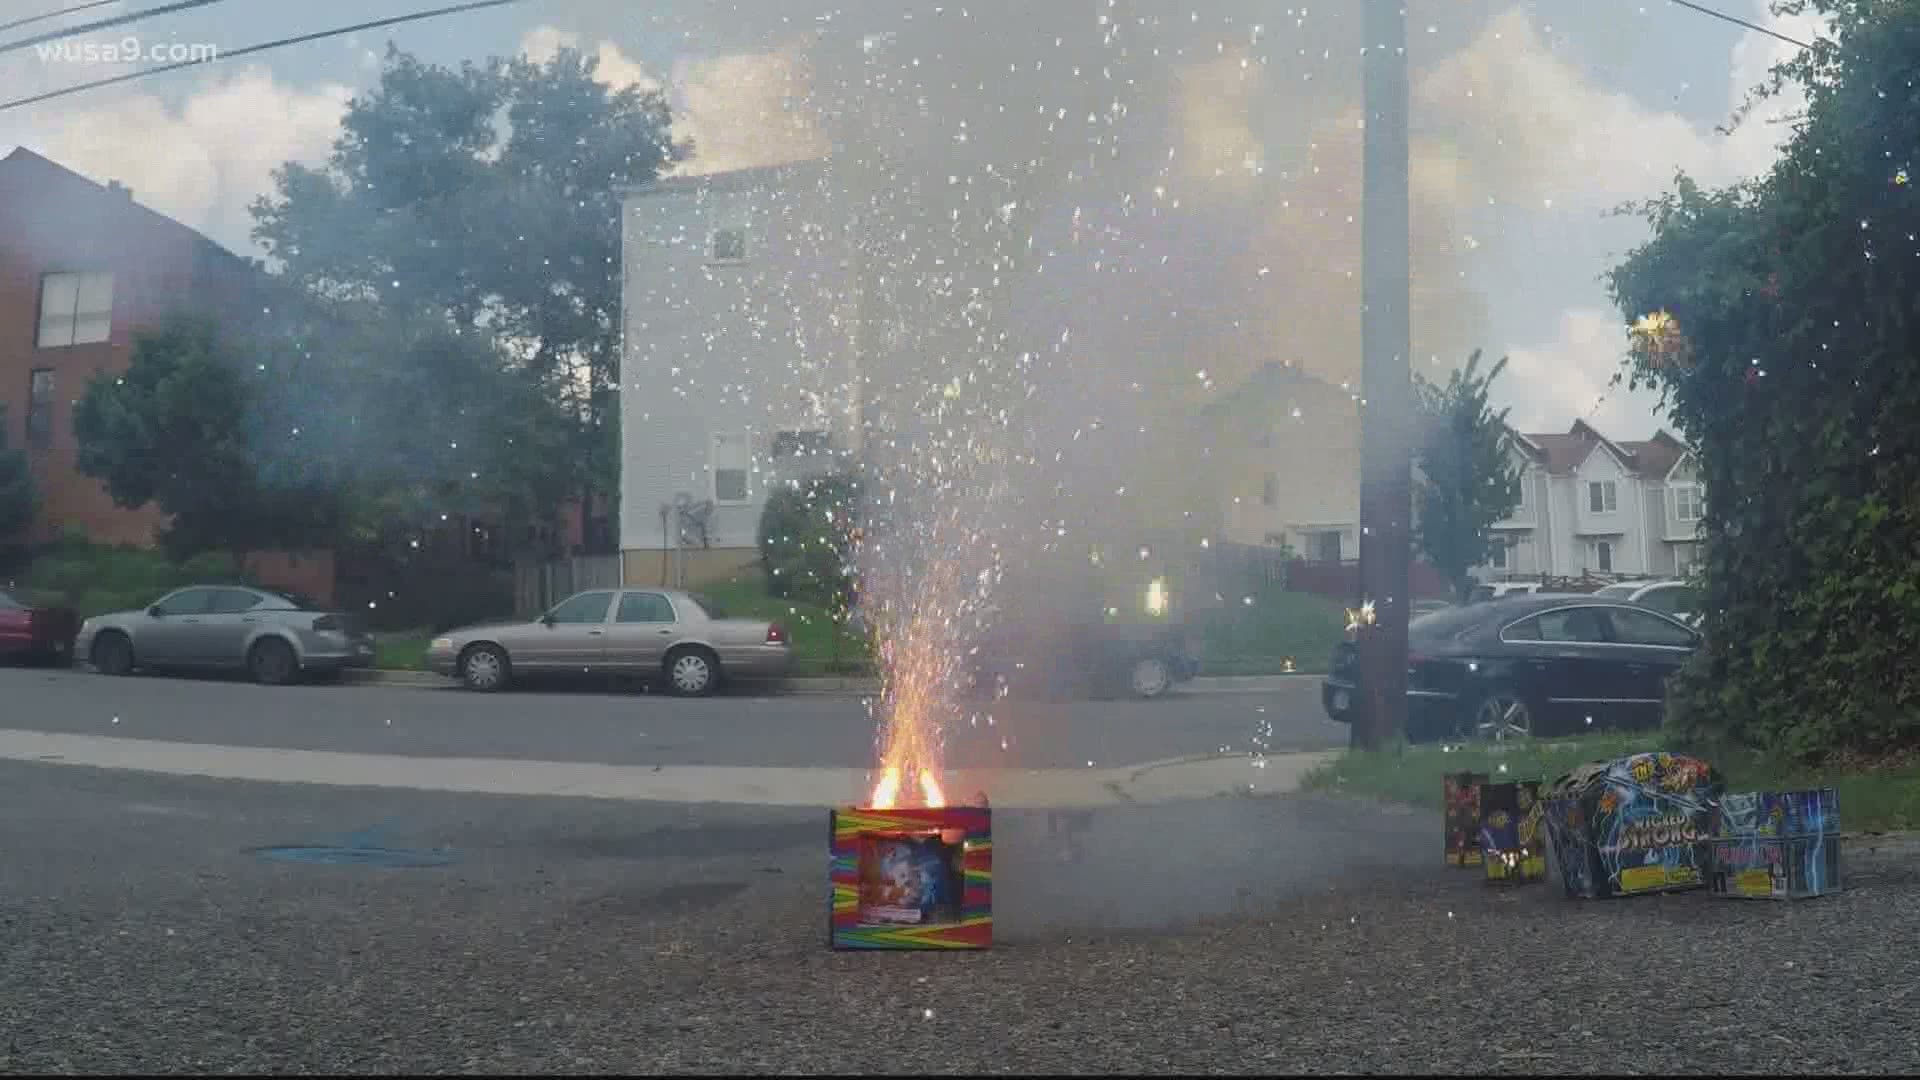 While fireworks remain illegal in DC, neighbors say many are still lighting them up.